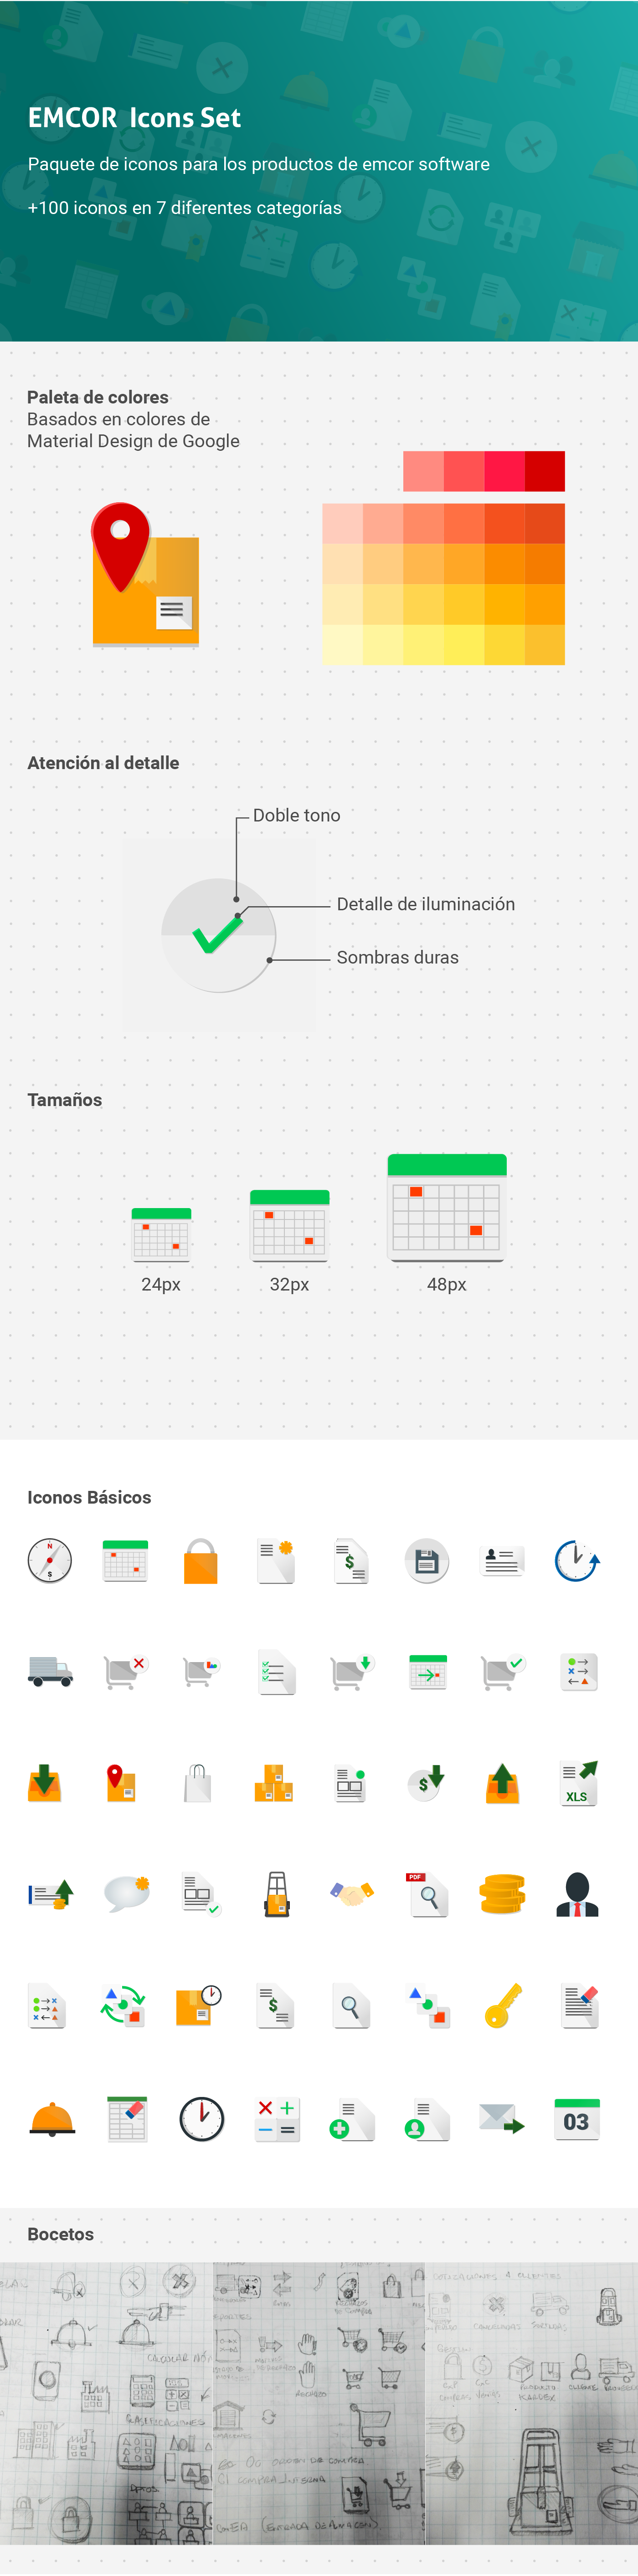 icons UI software Materialdesign material flat emcorsoftware